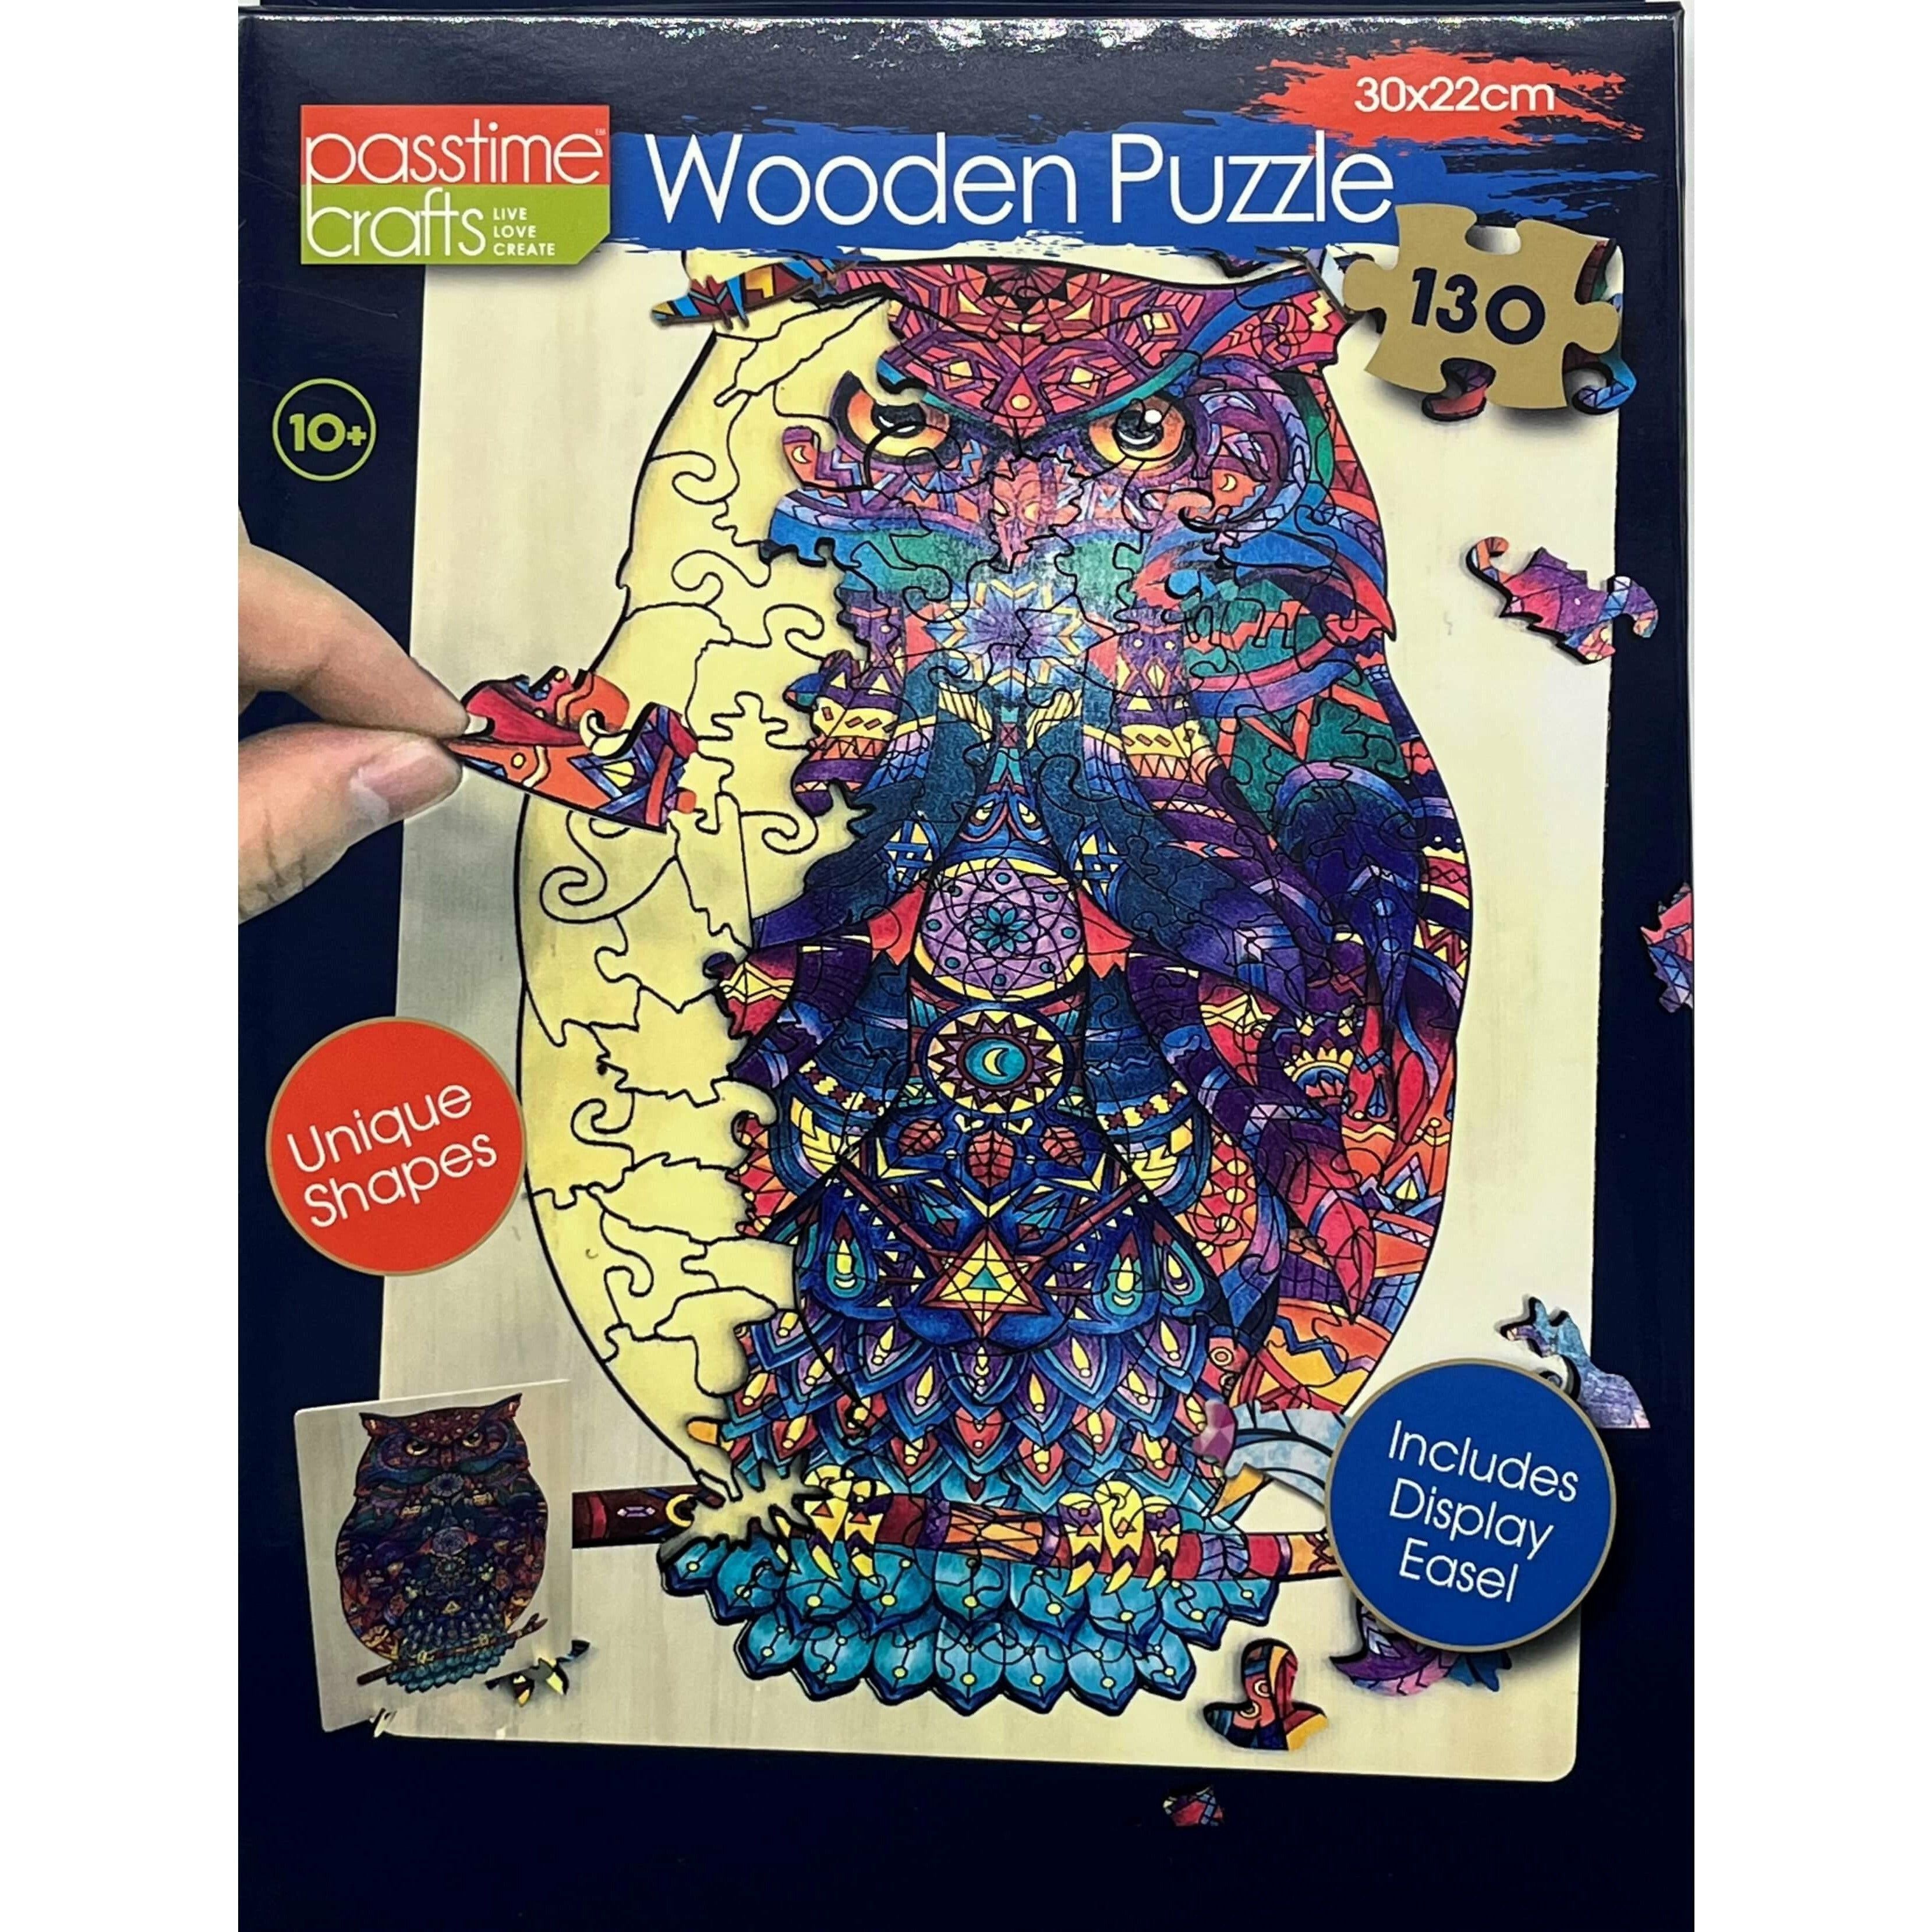 Wooden Jigsaw Puzzle - 30x22cm 1 Piece Assorted - Dollars and Sense